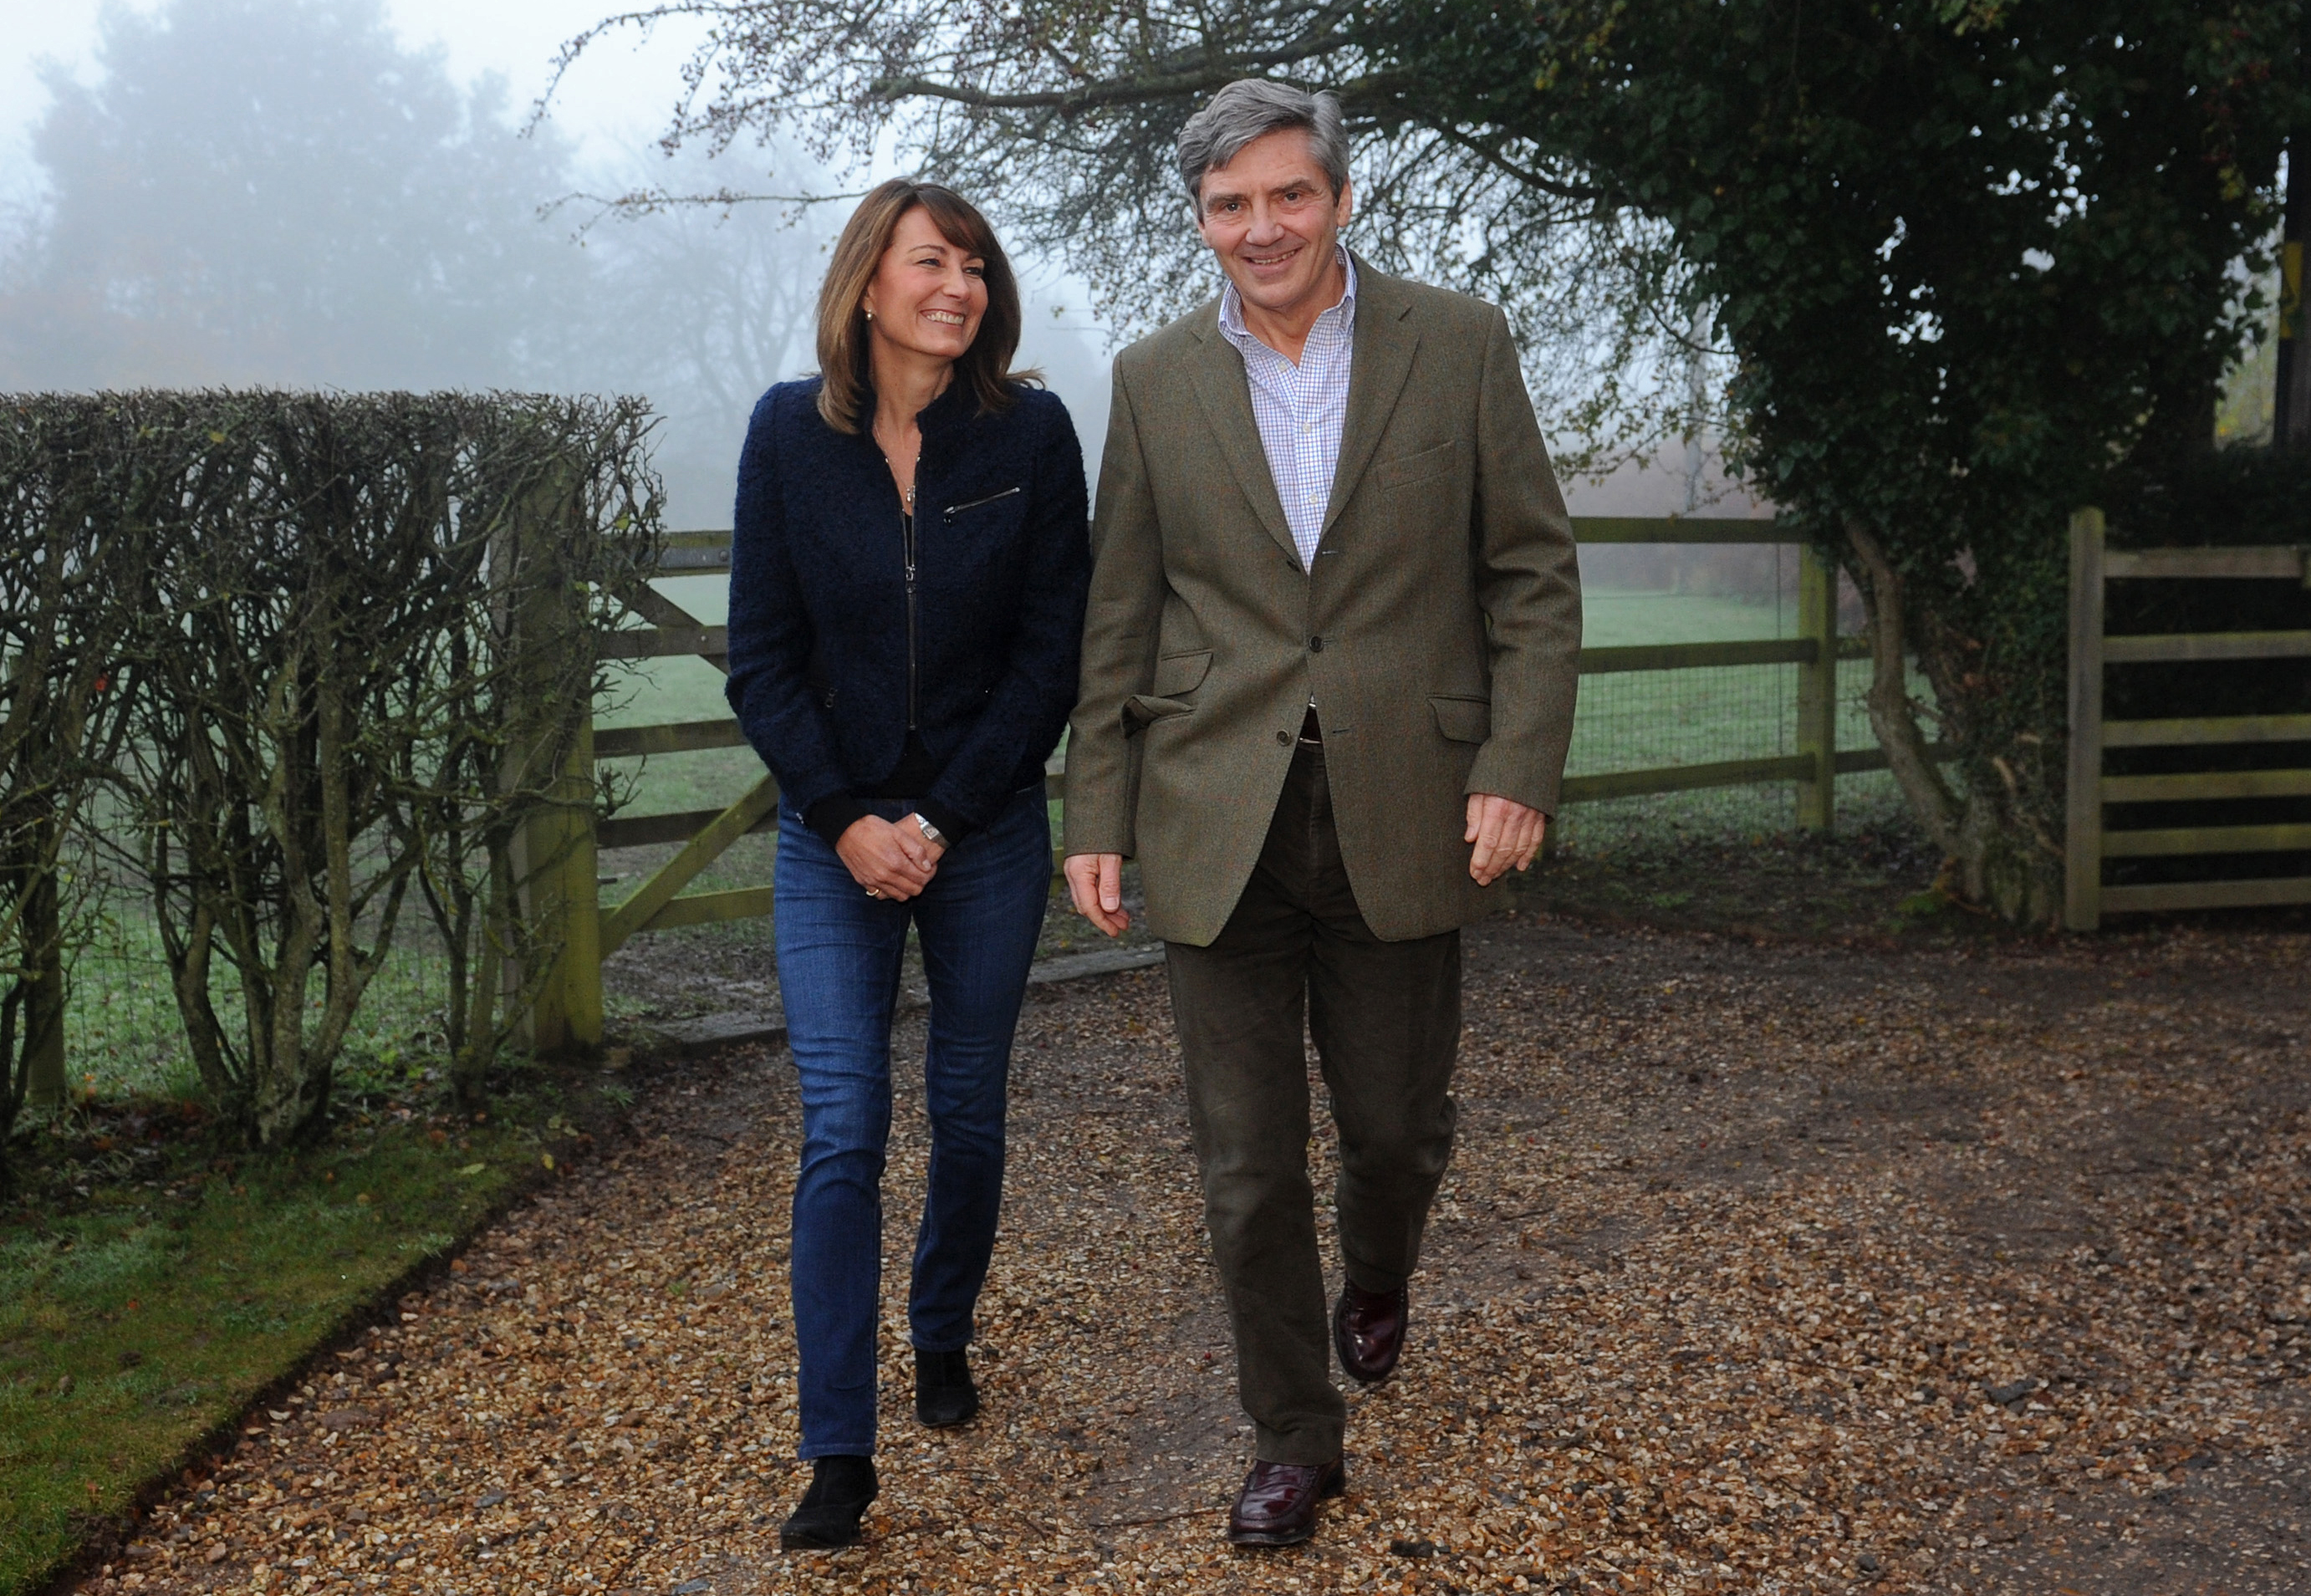 Michael and Carole Middleton pose for a photograph at their home in Berkshire, southern England on November 16, 2010. | Source: Getty Images